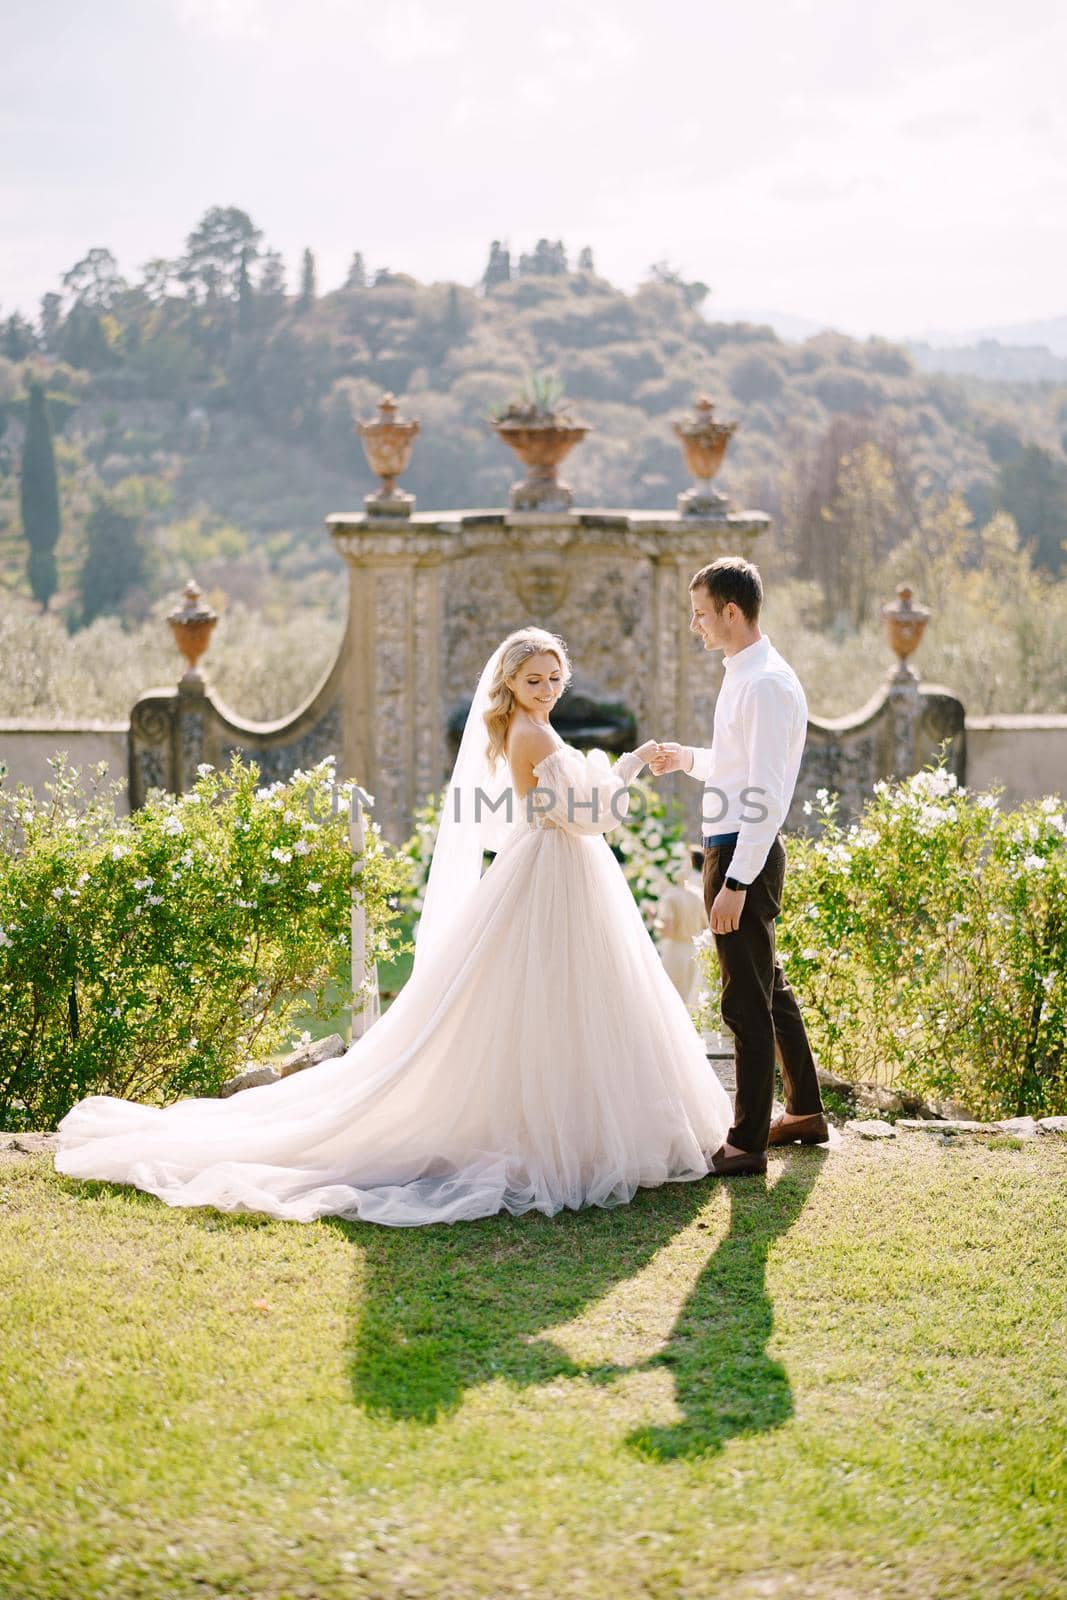 Florence, Italy - 02 october 2019: The bride and groom walk in the park. Wedding at an old winery villa in Tuscany, Italy. Round wedding arch decorated with white flowers and greenery in front by Nadtochiy